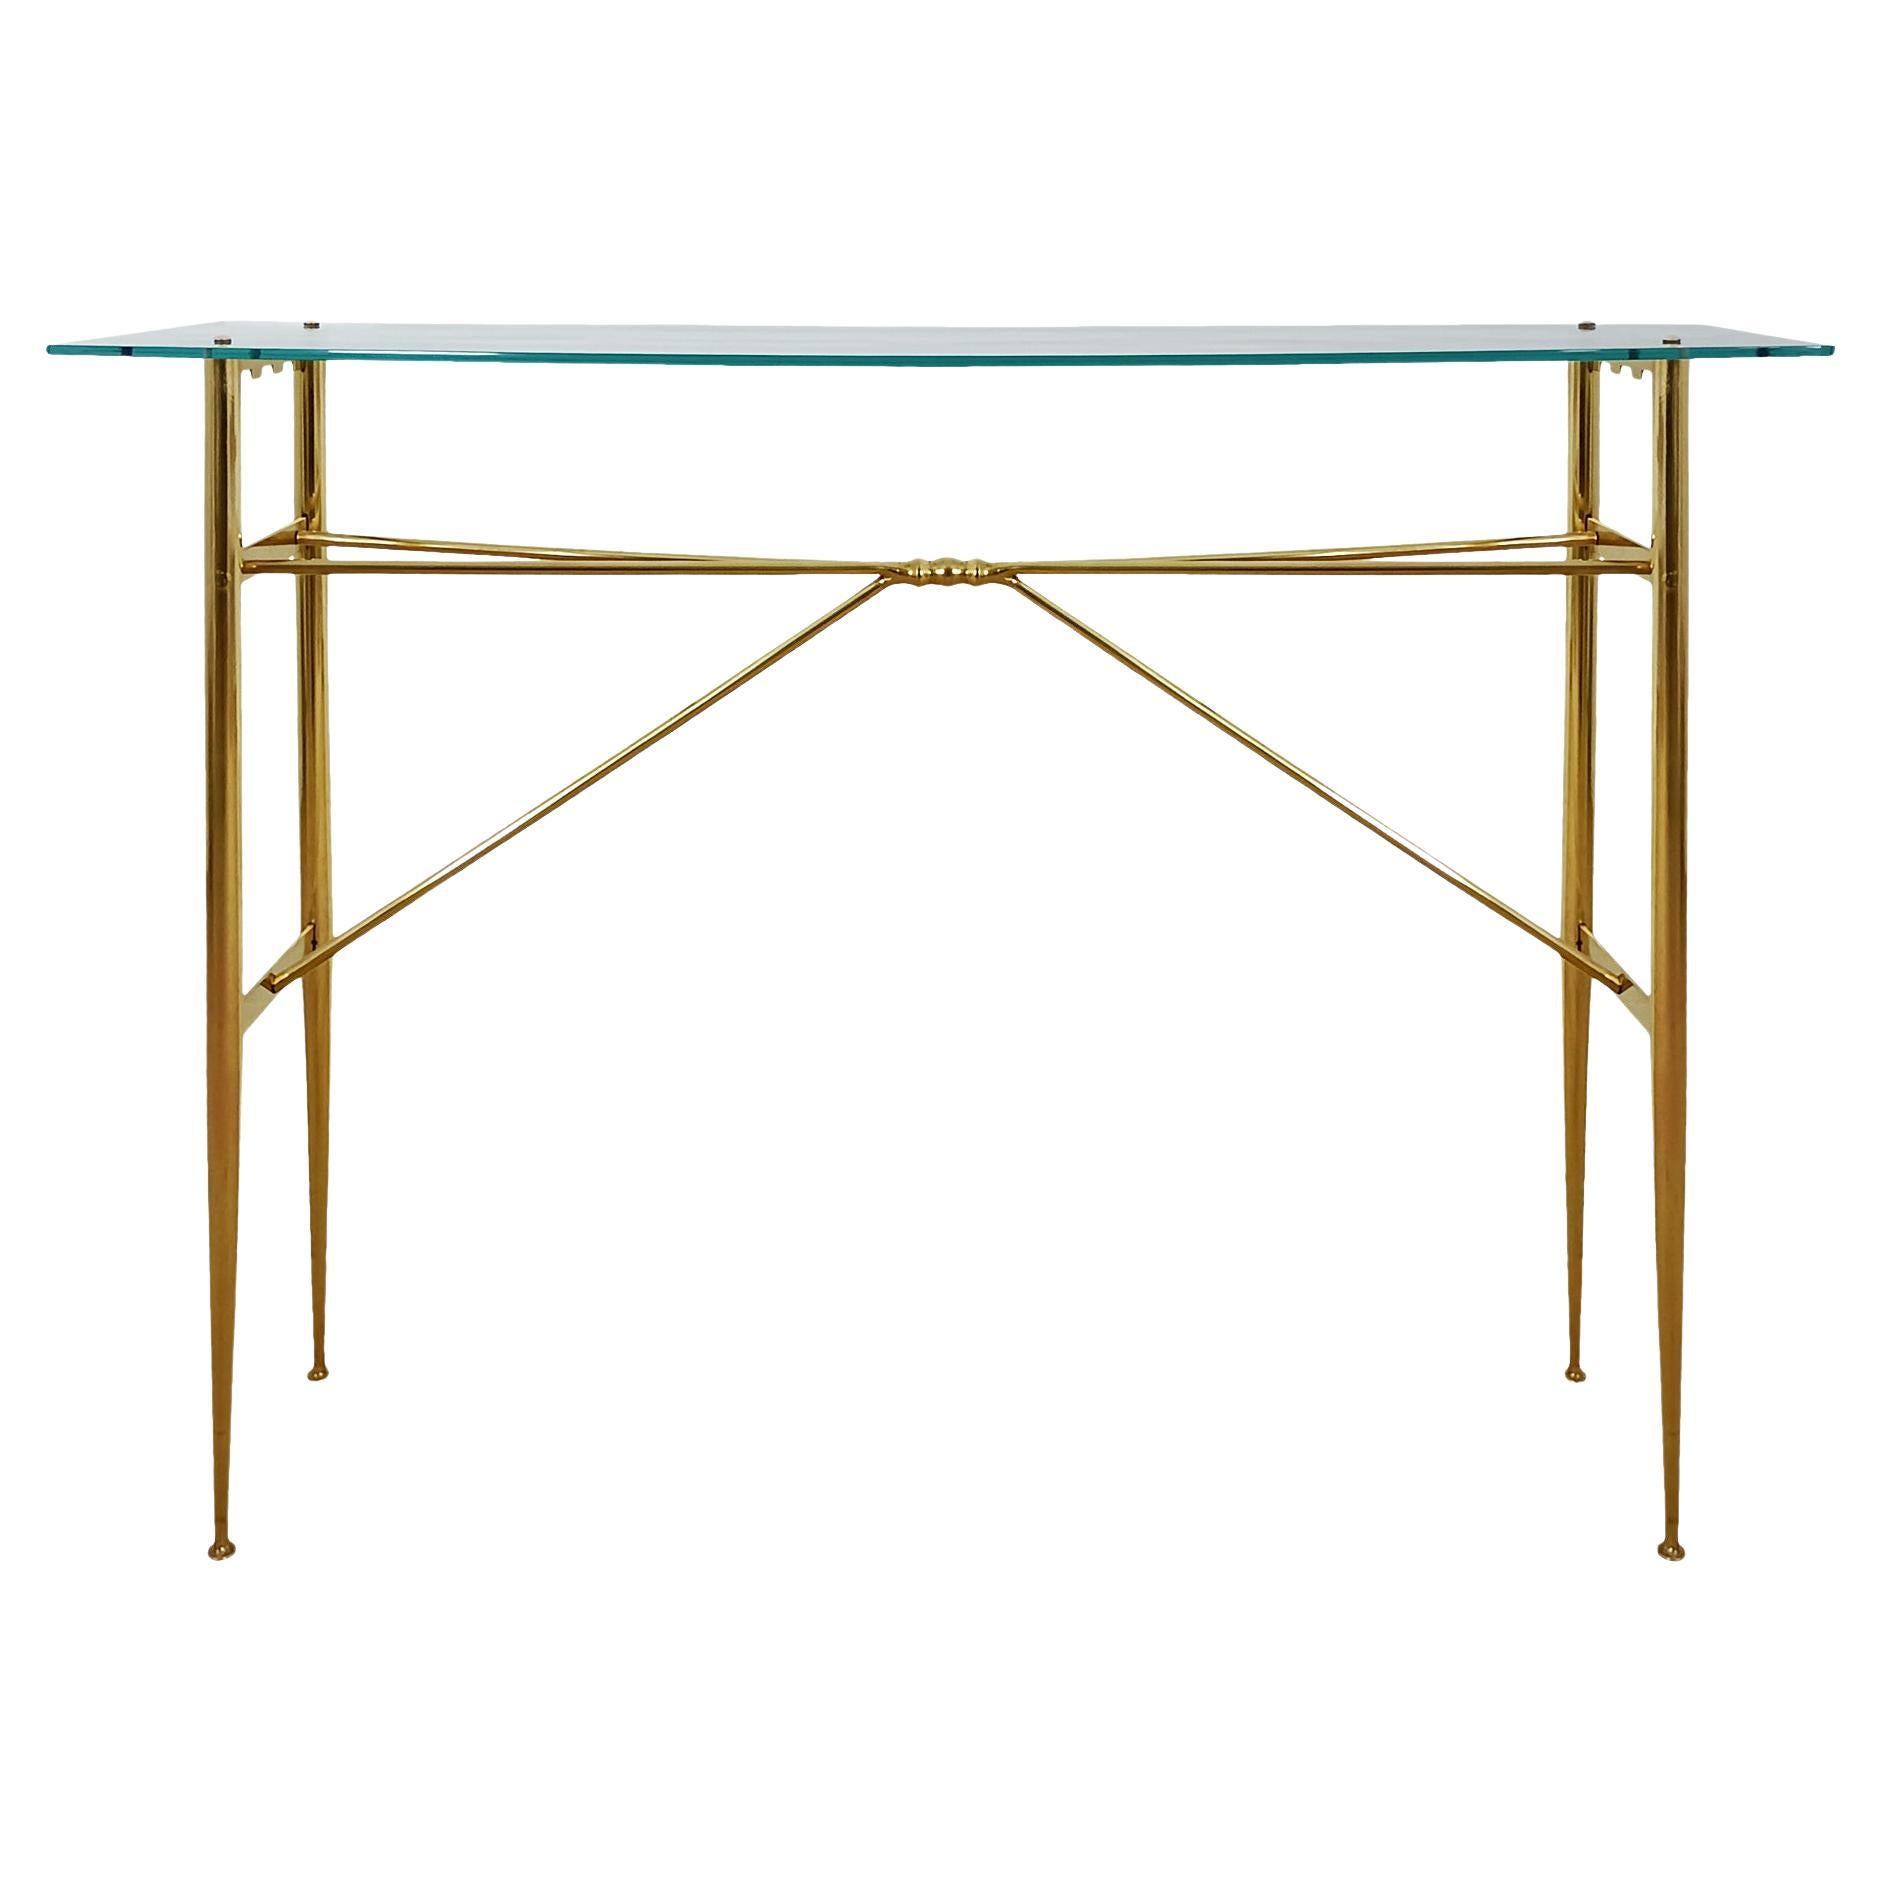 Mid-Century Modern Console Table in Solid Brass and a Glass Shelf, Italy